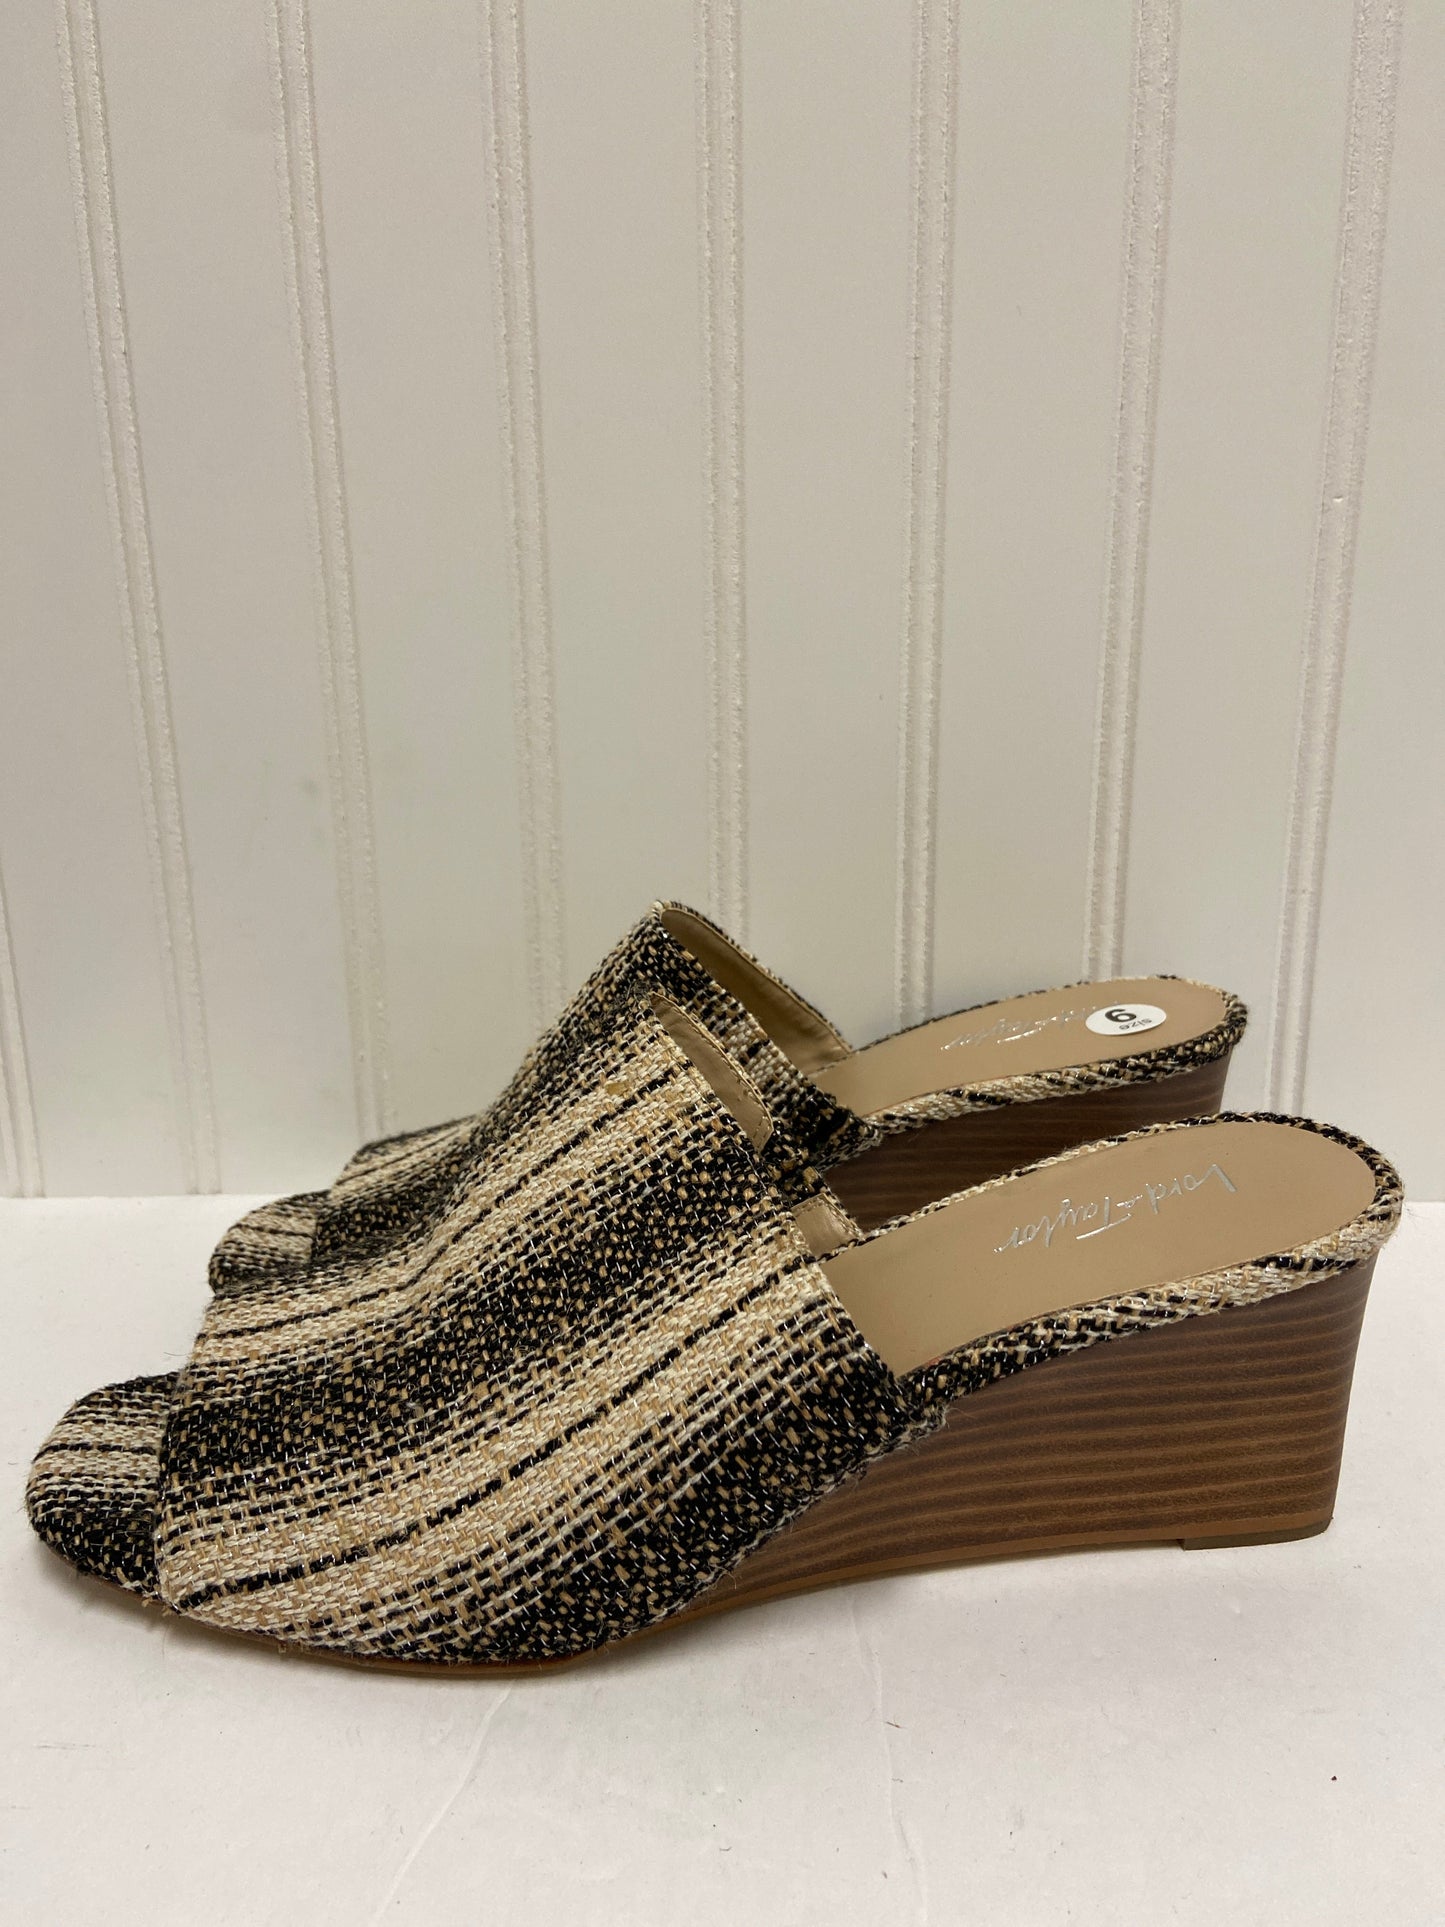 Sandals Heels Wedge By Lord And Taylor  Size: 9